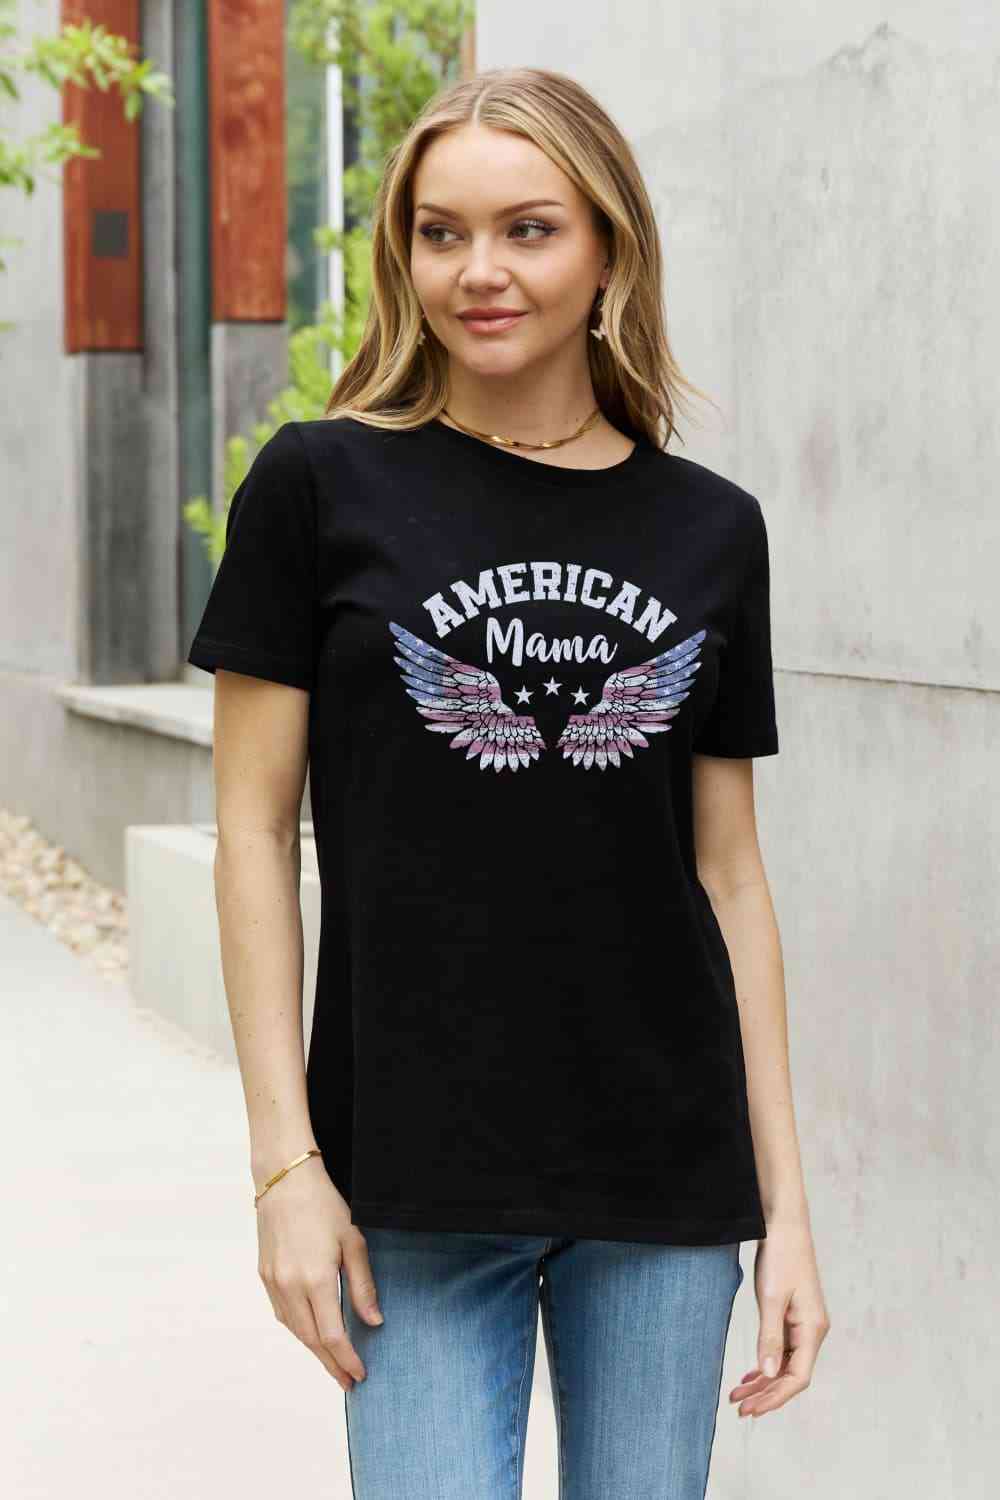 Simply Love AMERICAN MAMA Graphic Cotton Tee